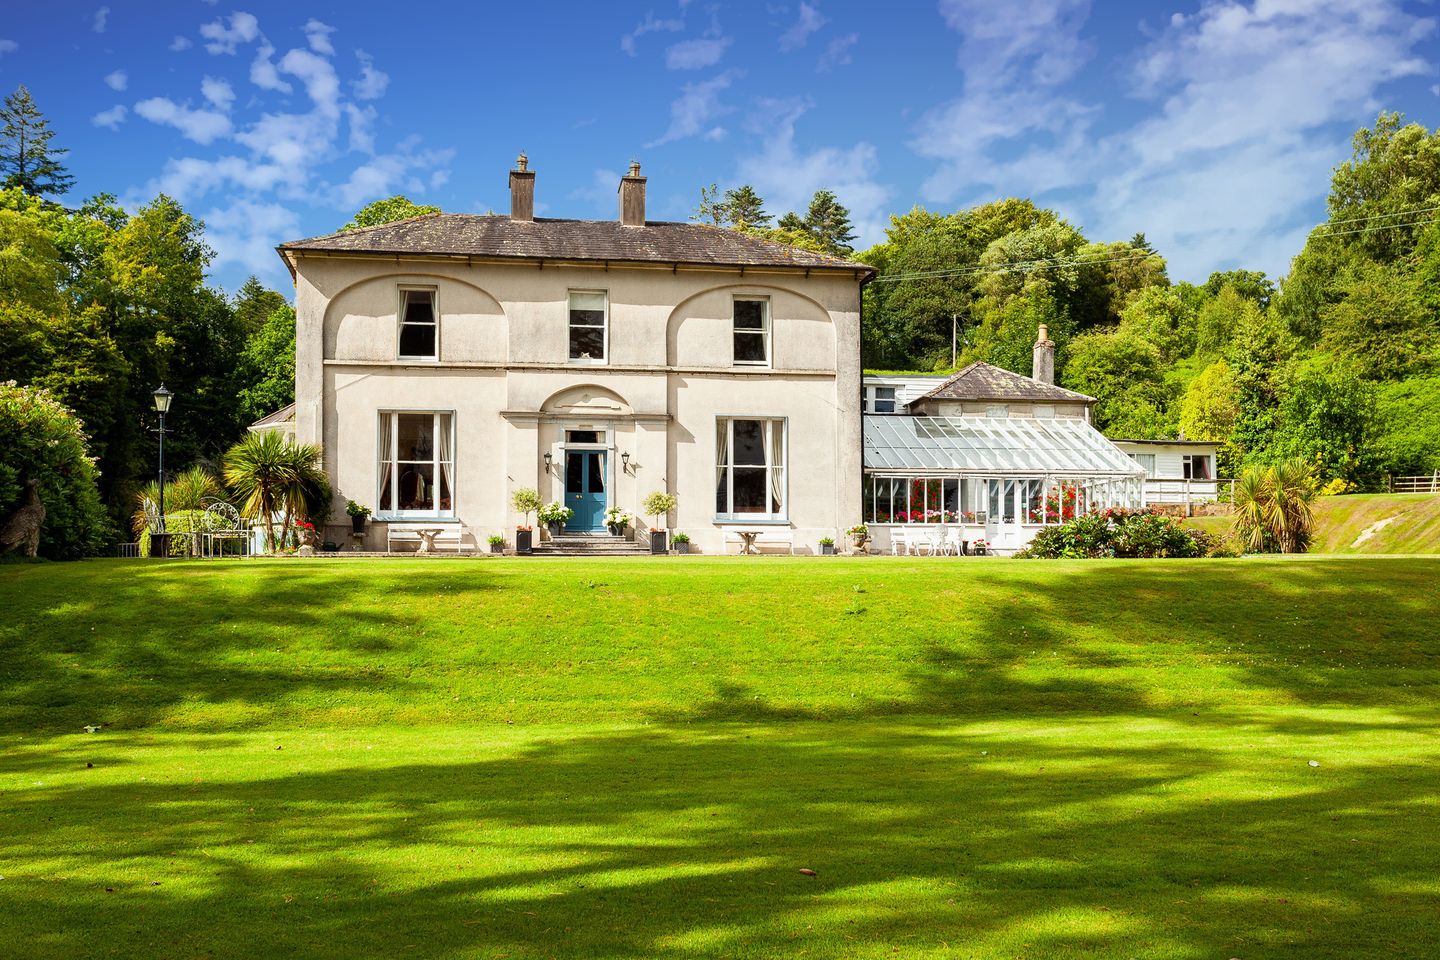 BALLYRAFTER COUNTRY HOUSE HOTEL, Ballyrafter, Lismore, Co. Waterford